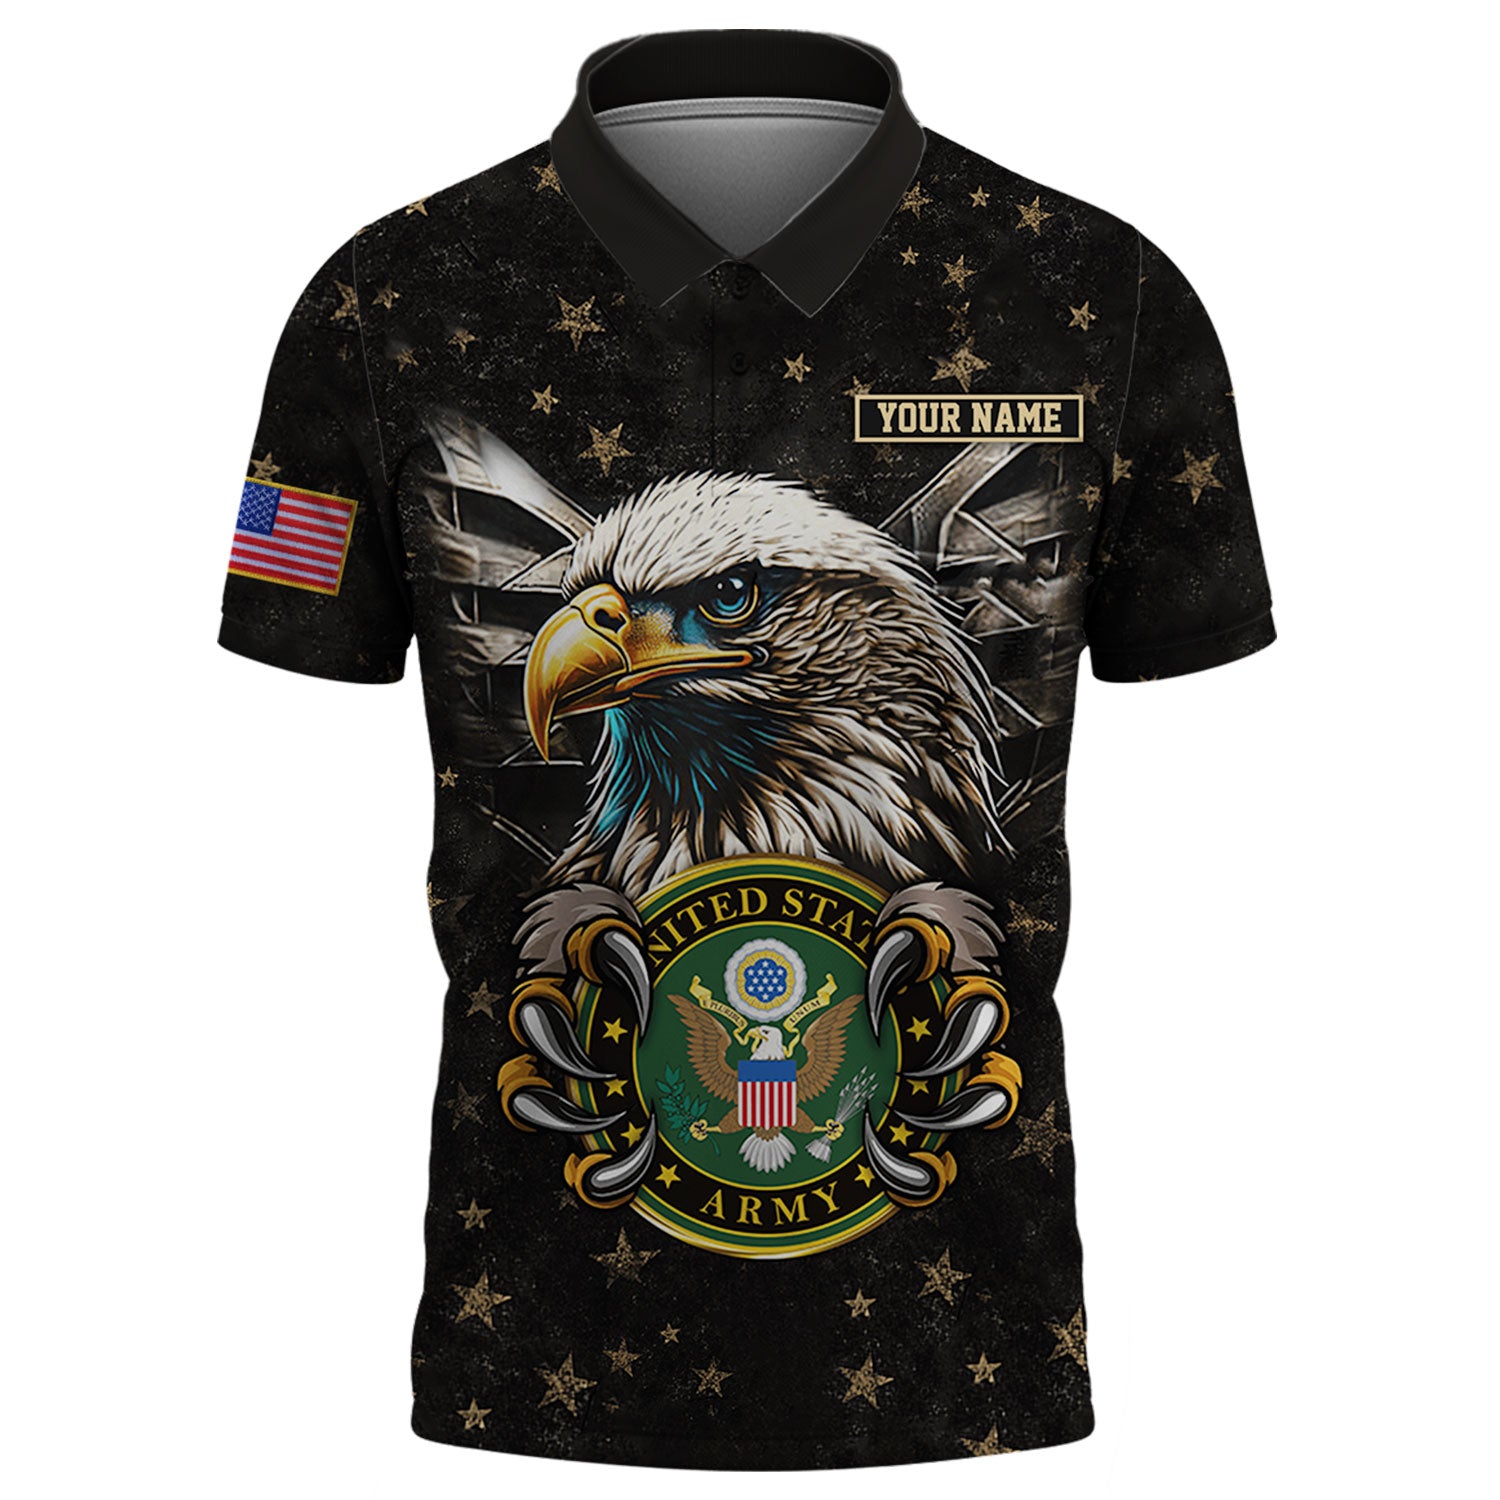 United States Army - We Stand For The Flag - We Kneel For The Fallen, Customized Text Polo Shirt, Gift For Veterans